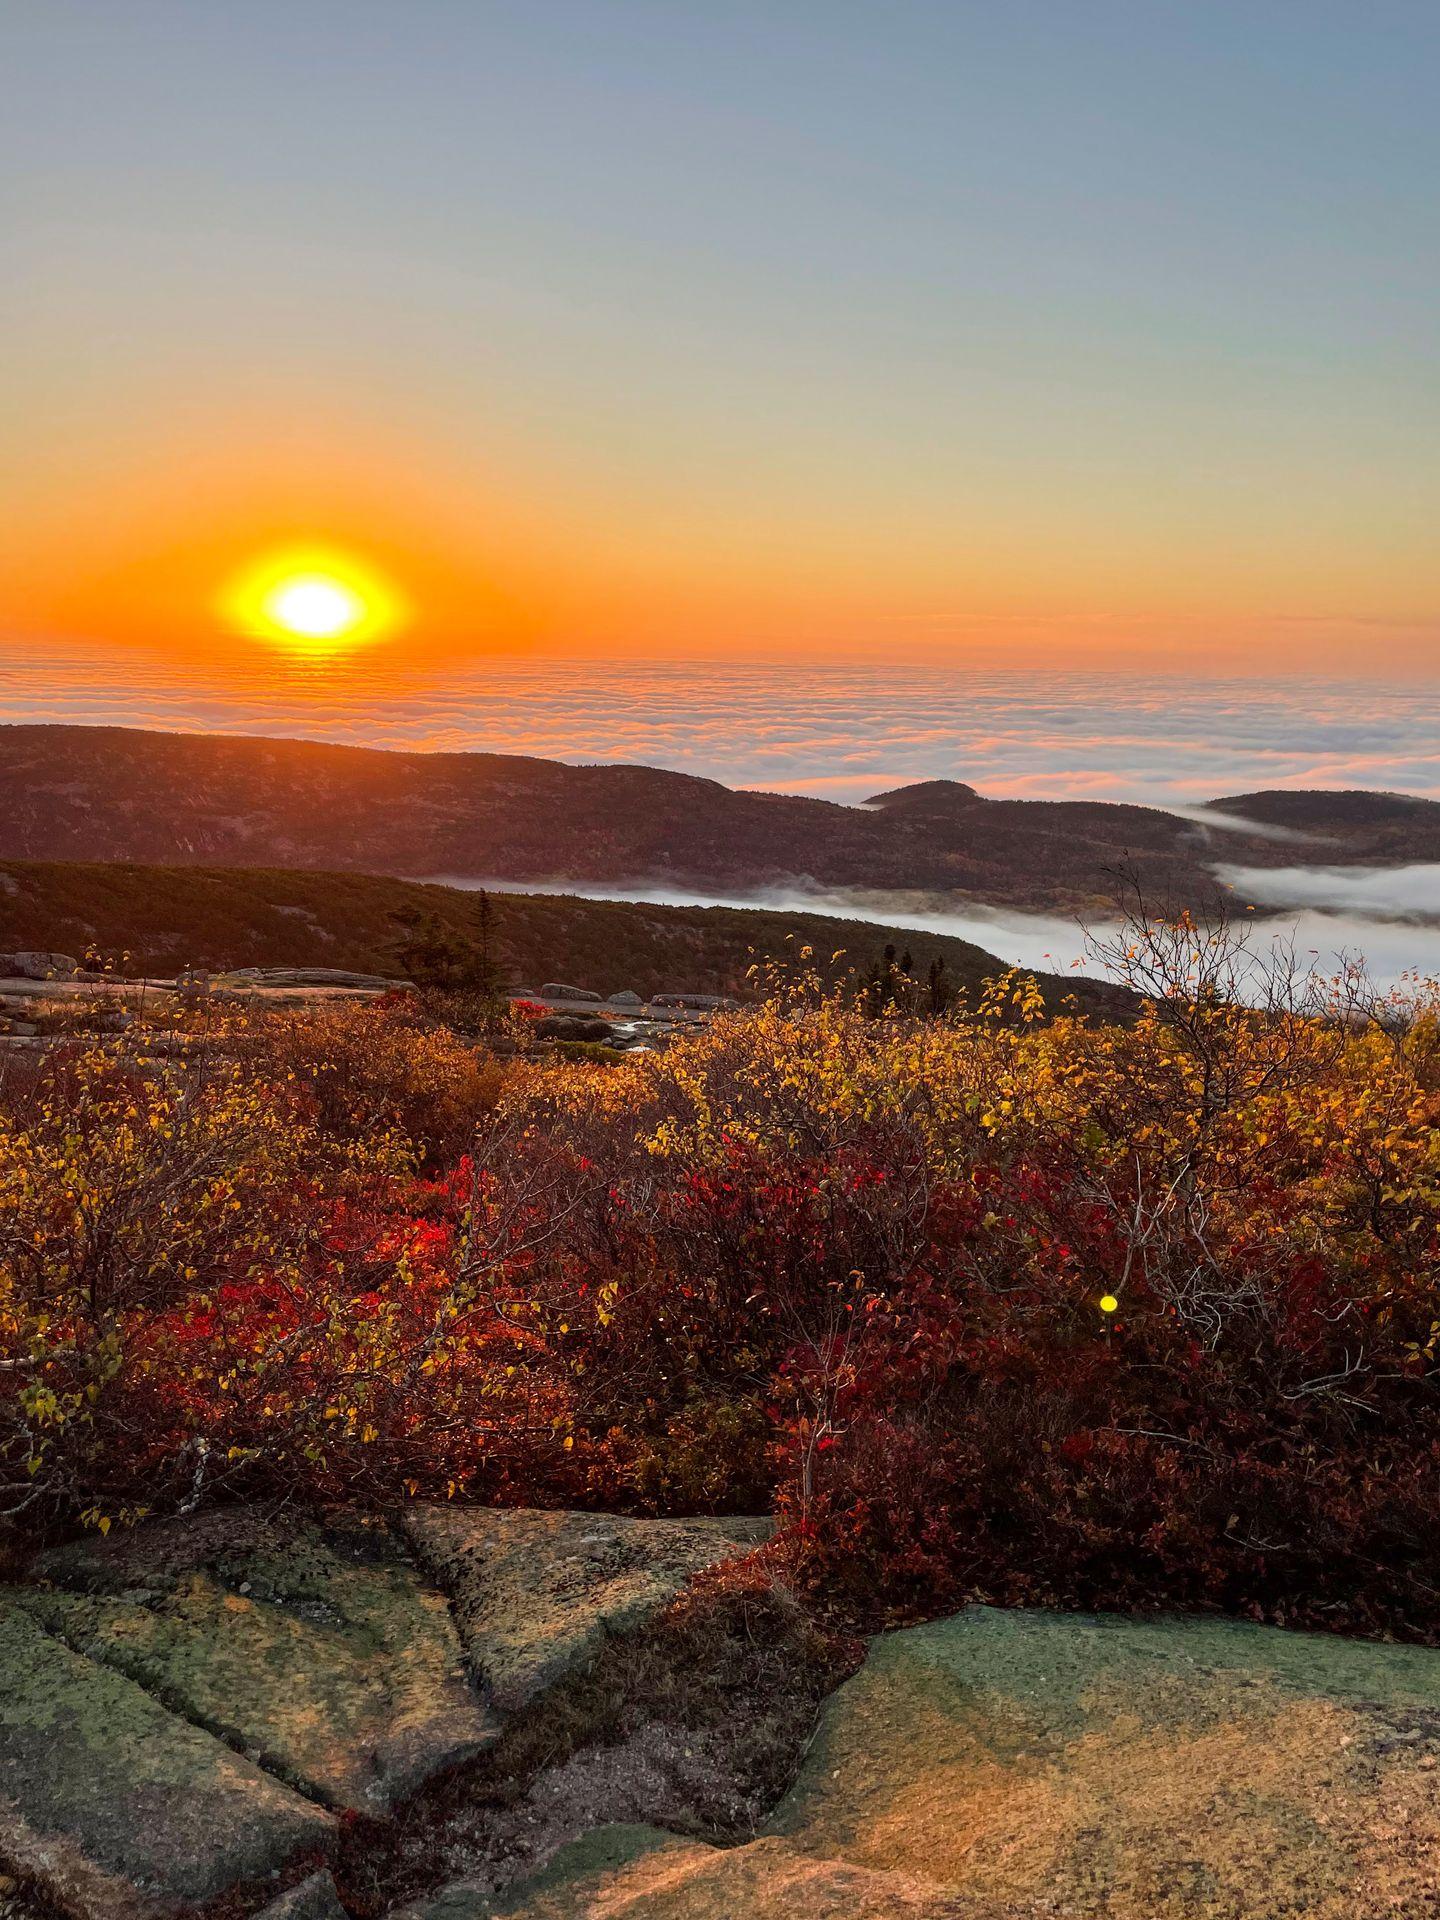 The sun rising above a cloud inversion from Cadillac Mountain.